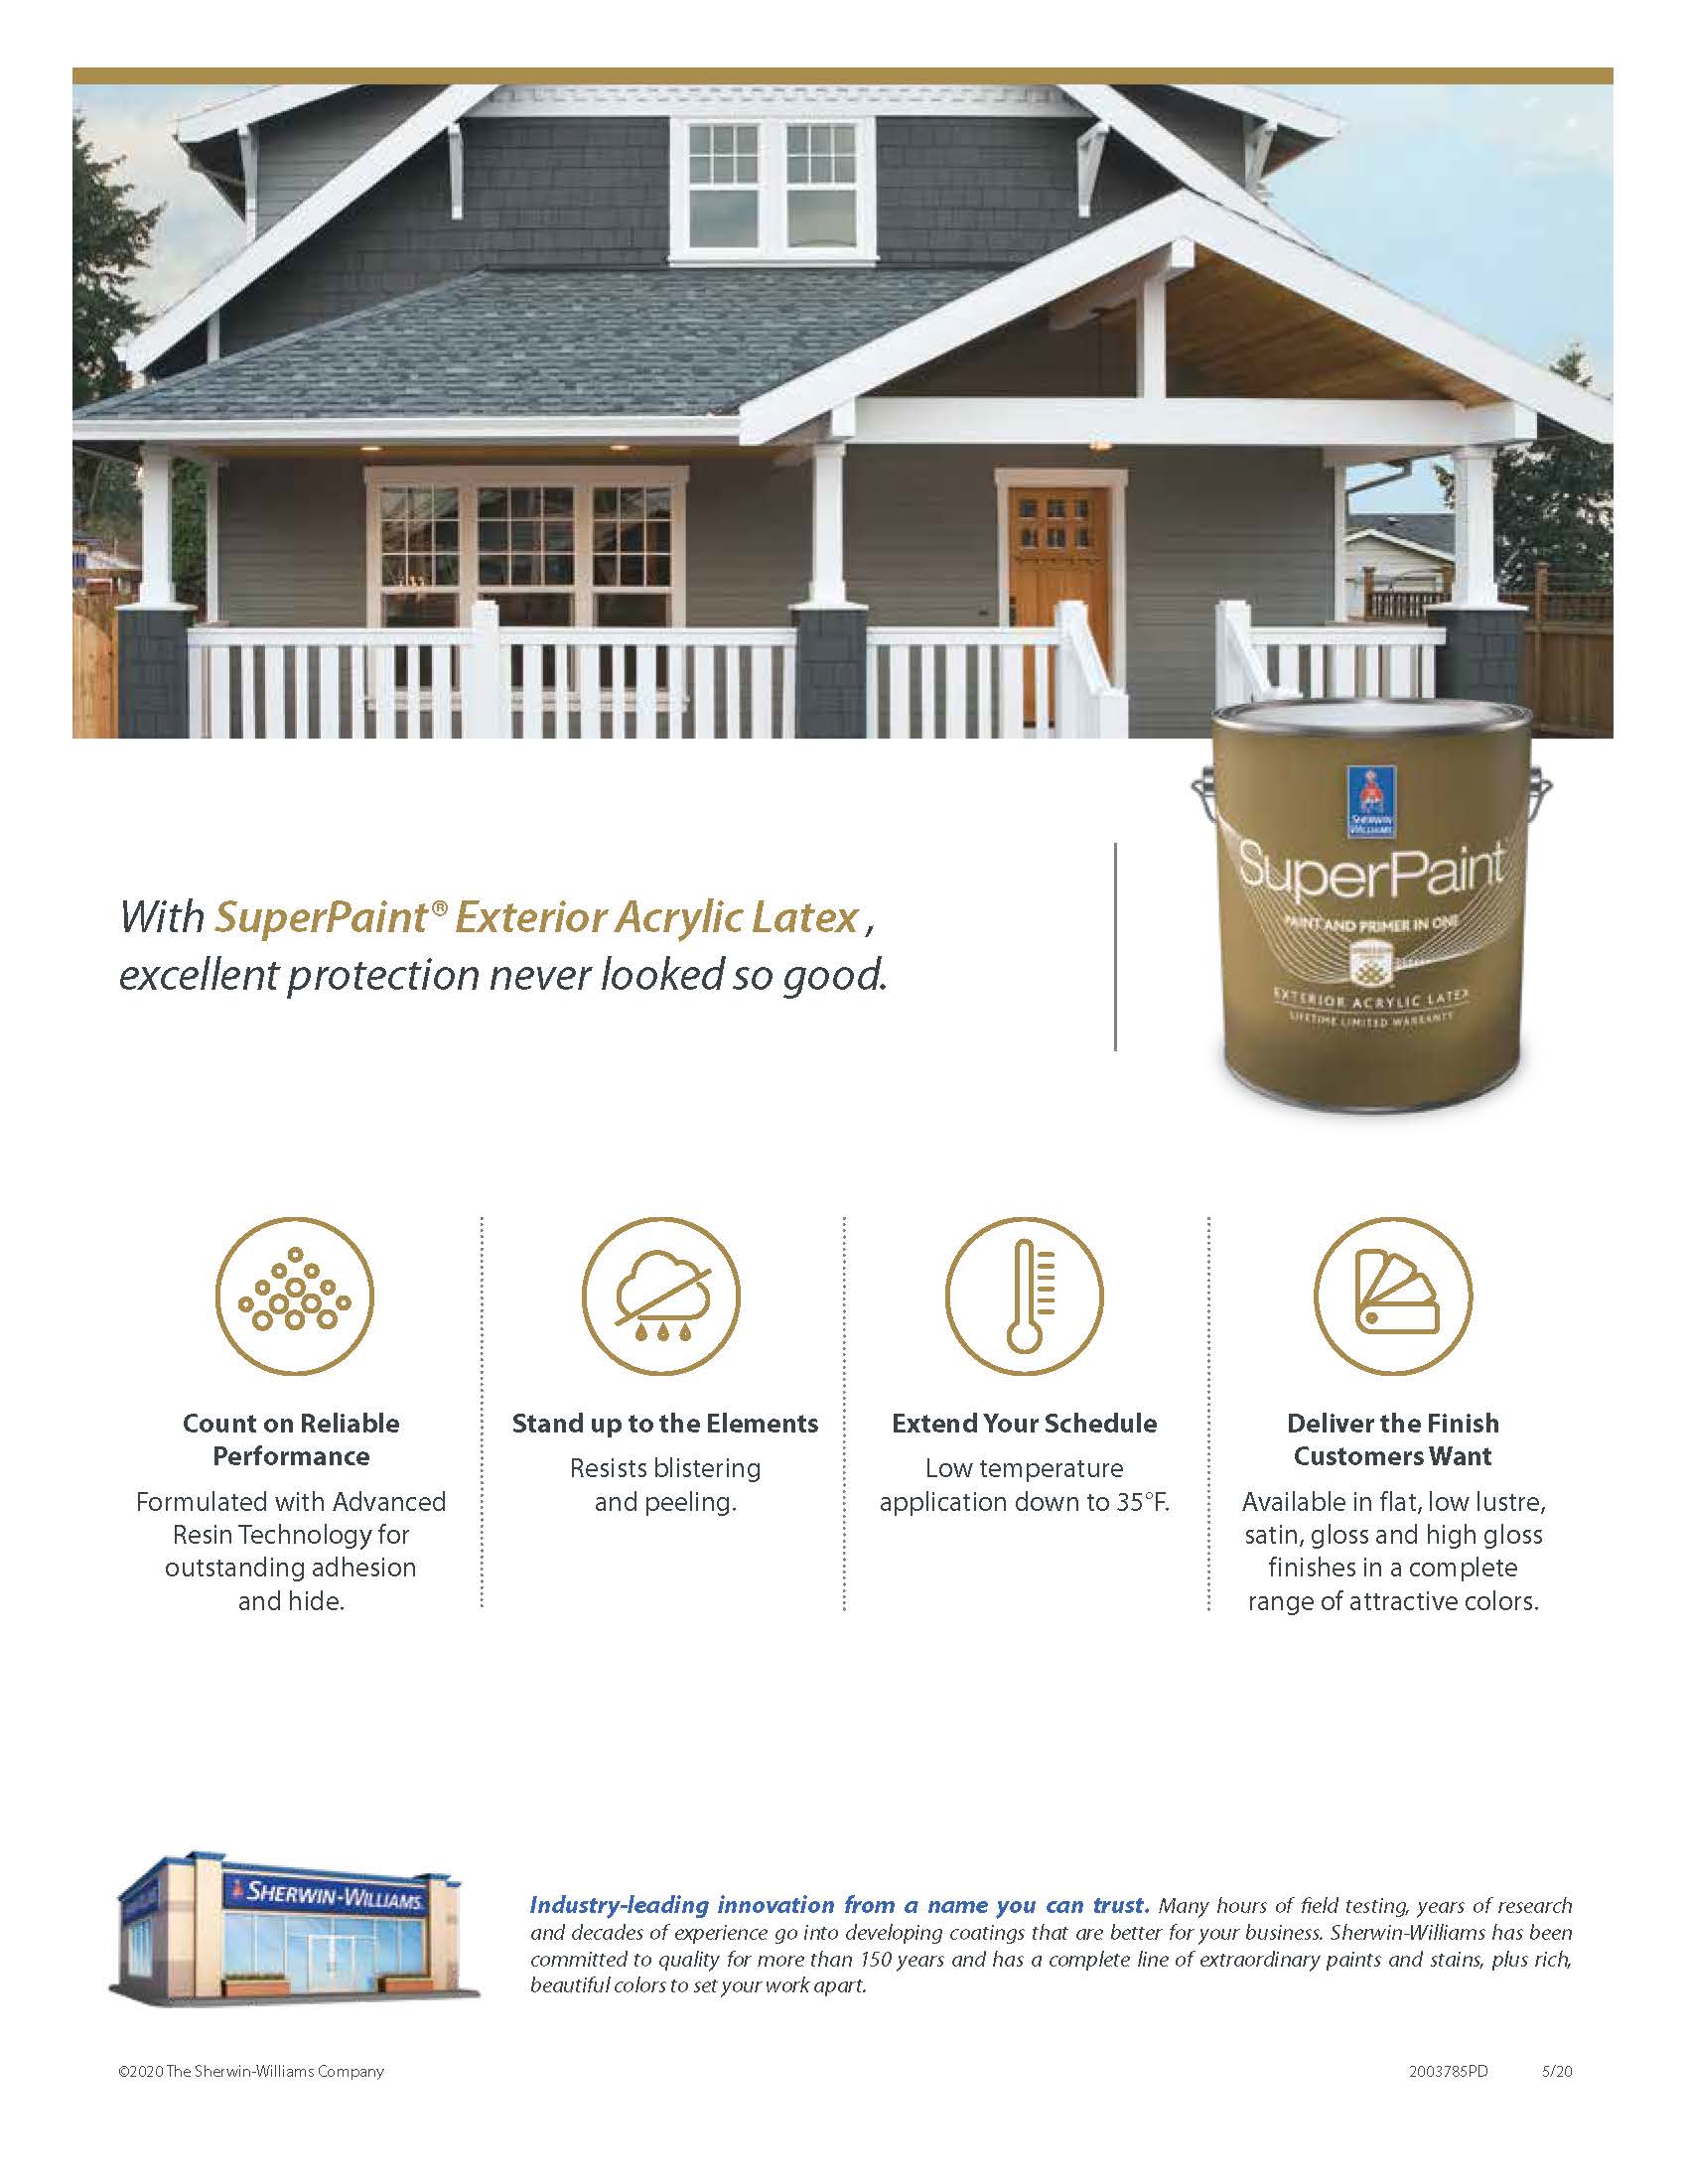 Learn About Sherwin Williams Resilience Exterior Paint